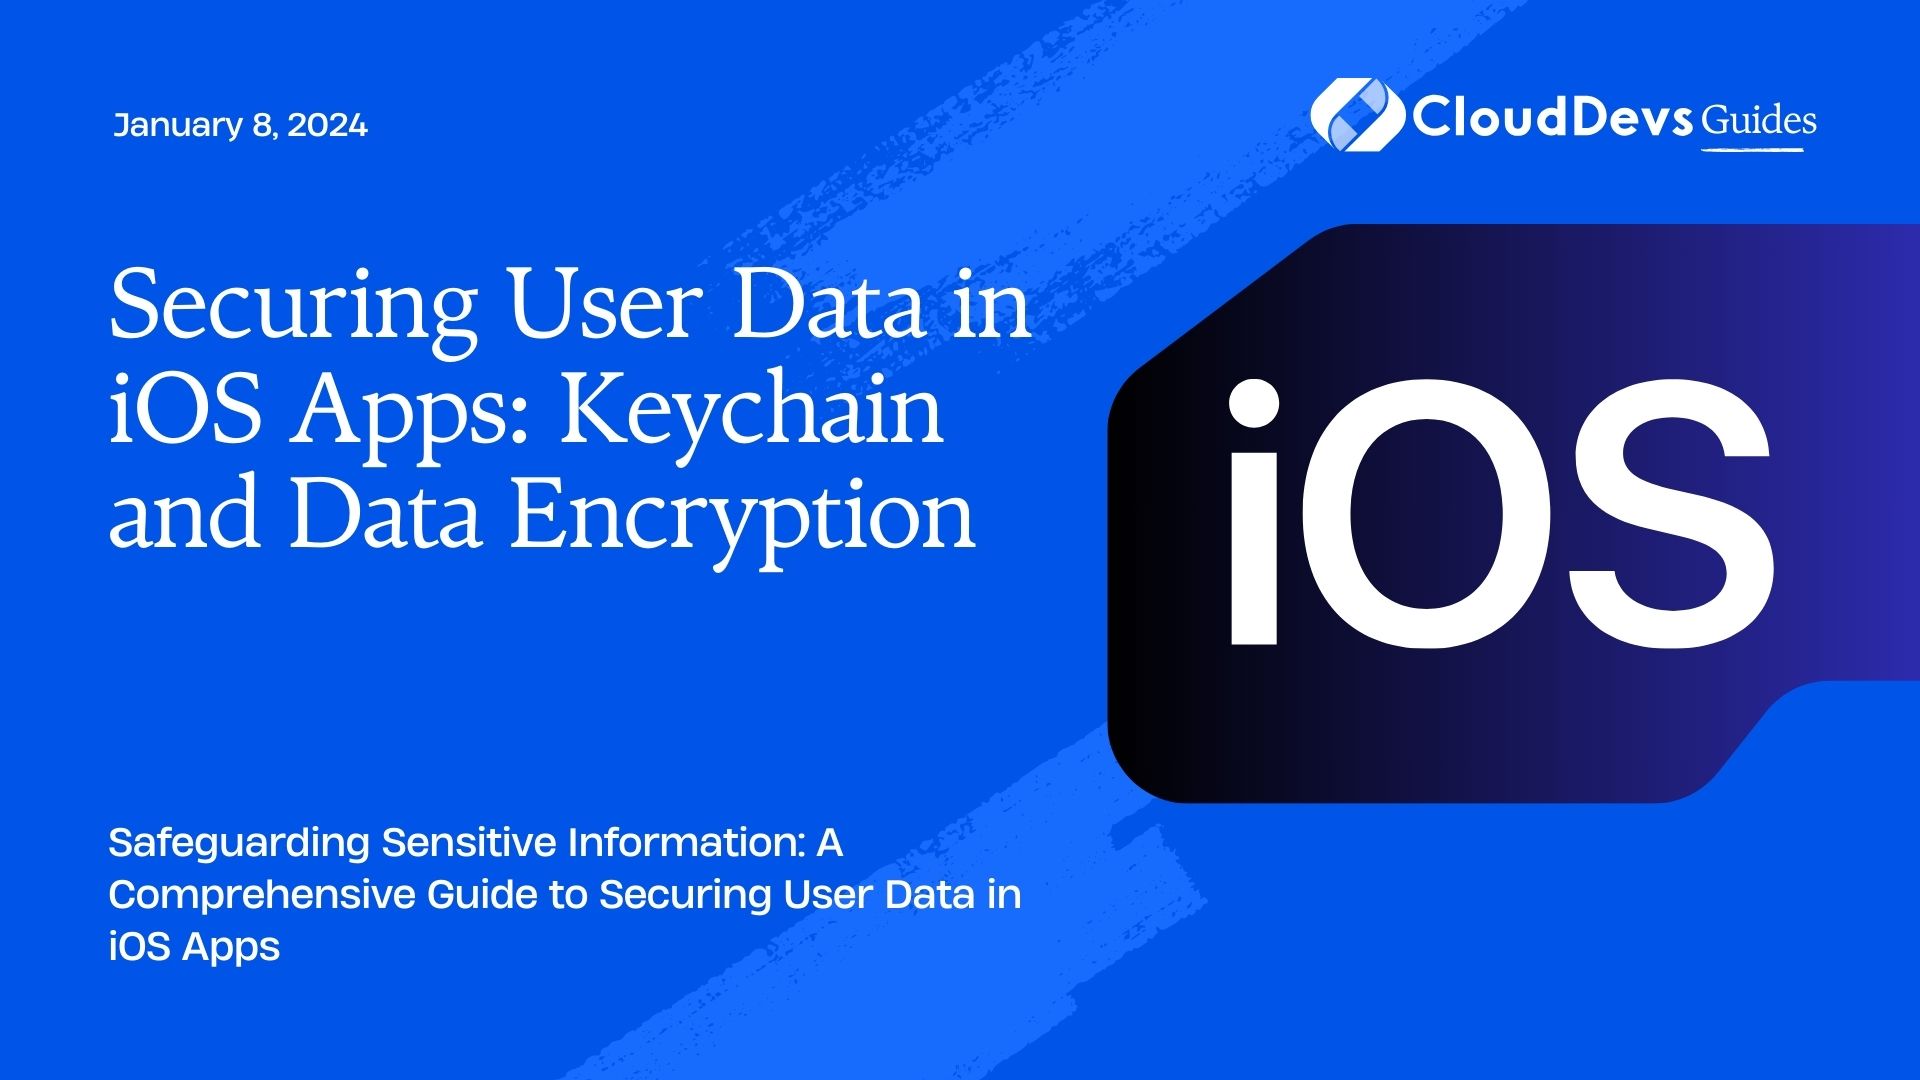 Securing User Data in iOS Apps: Keychain and Data Encryption